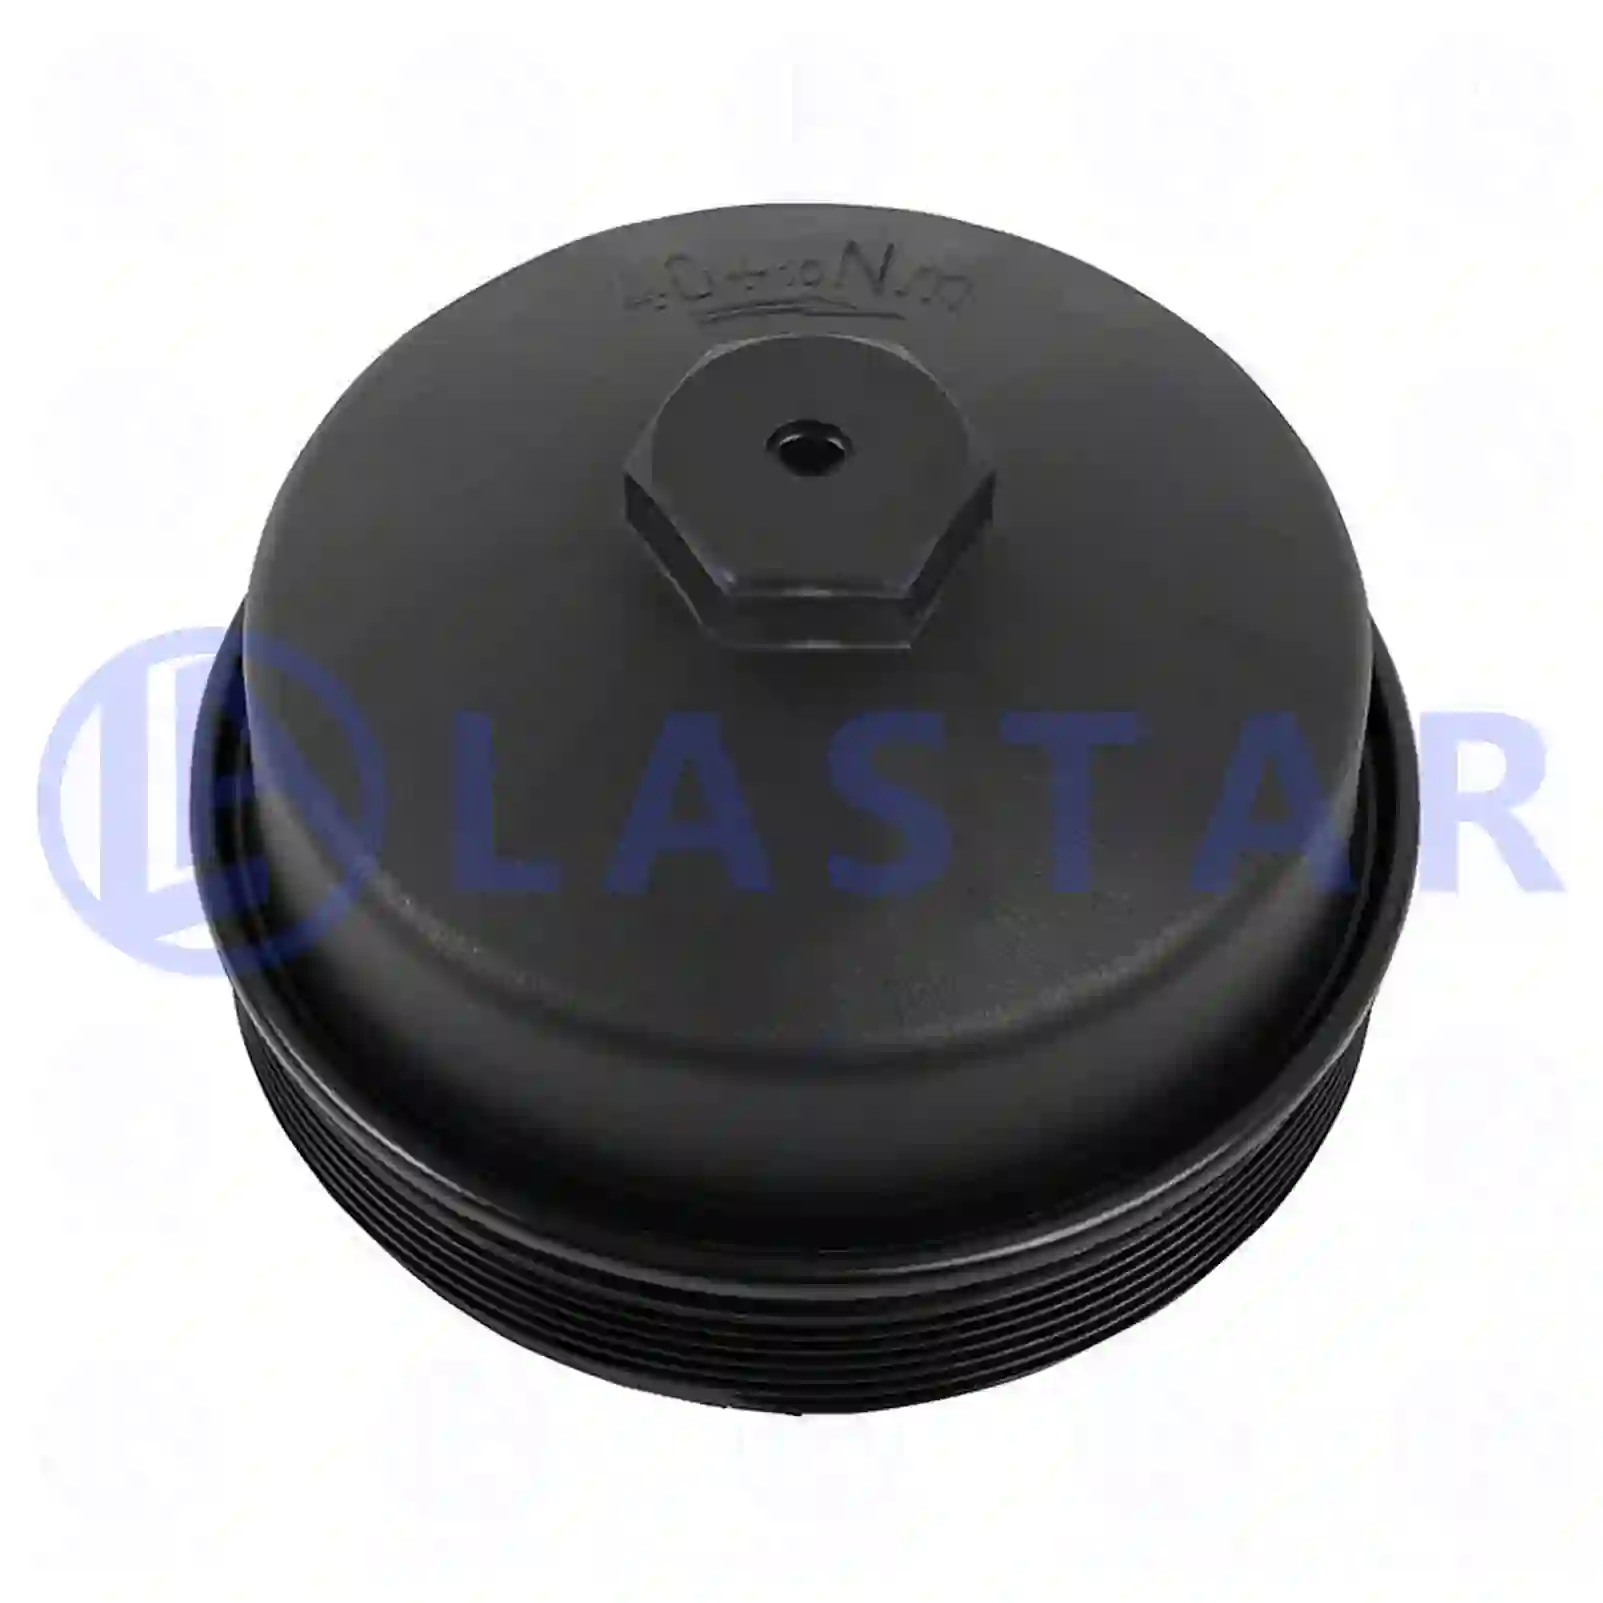 Oil filter cover, plastic, with o-ring, 77701984, 4571840008, 5411840208, ZG01728-0008 ||  77701984 Lastar Spare Part | Truck Spare Parts, Auotomotive Spare Parts Oil filter cover, plastic, with o-ring, 77701984, 4571840008, 5411840208, ZG01728-0008 ||  77701984 Lastar Spare Part | Truck Spare Parts, Auotomotive Spare Parts